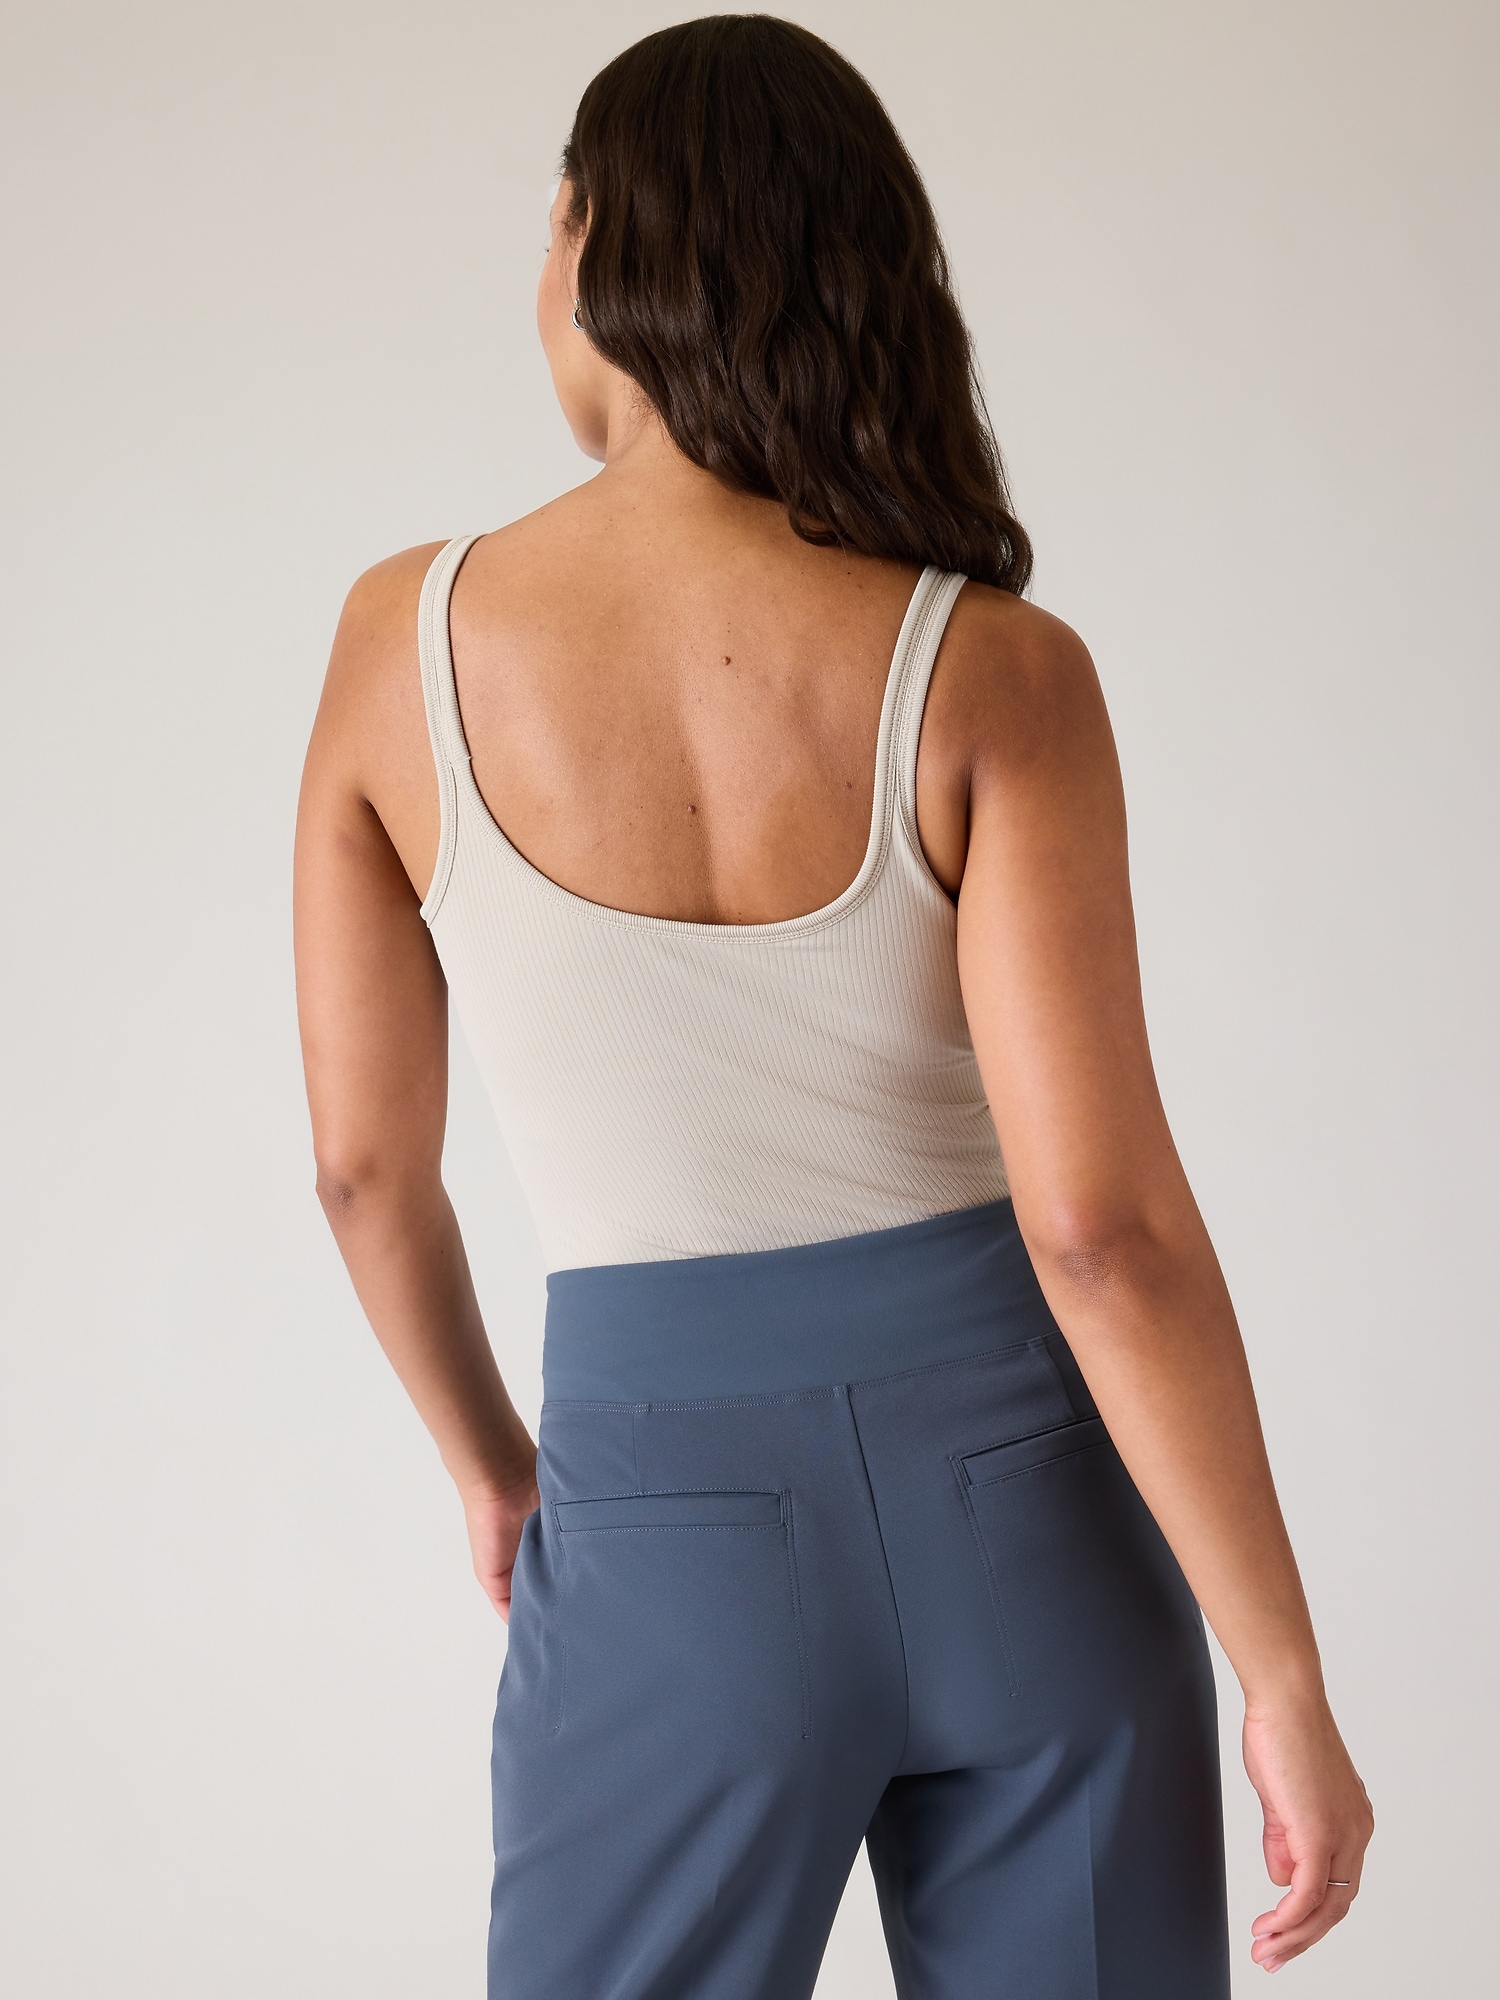 Travel fits. For me tanks with built in bras are a must! They are easy to  layer and allows me to pack less tops/bras. : r/lululemon